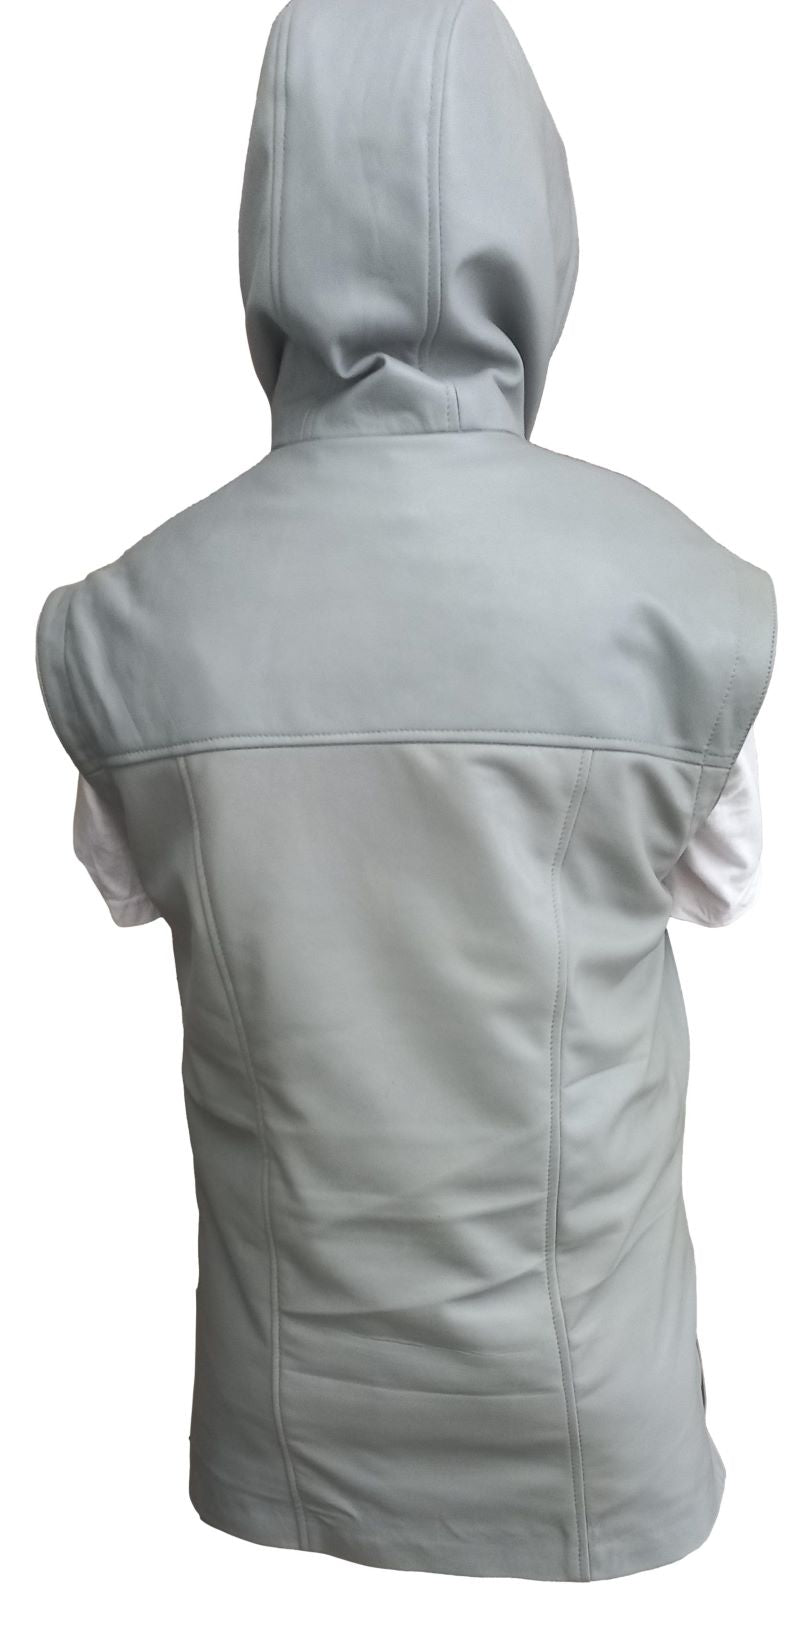 Picture of a model wearing our Mens Leather Vest with hood, Gray color, back view.